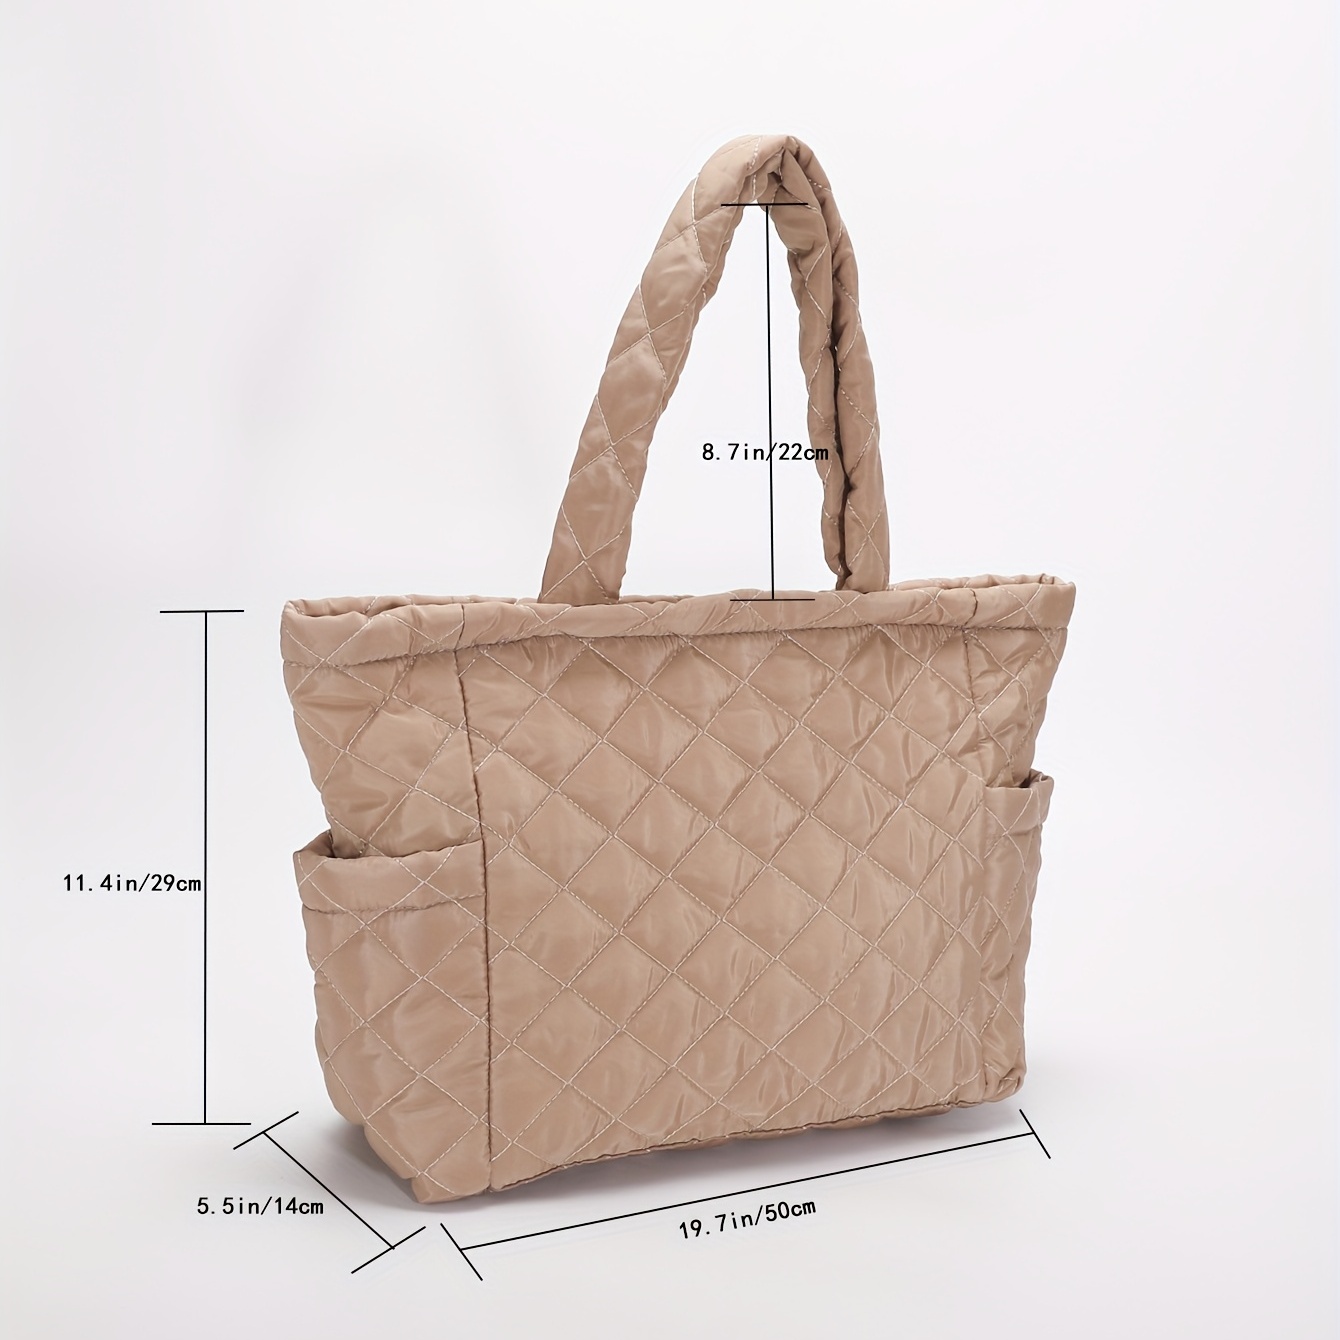 Simple Padded Quilted Tote Bag Product Details